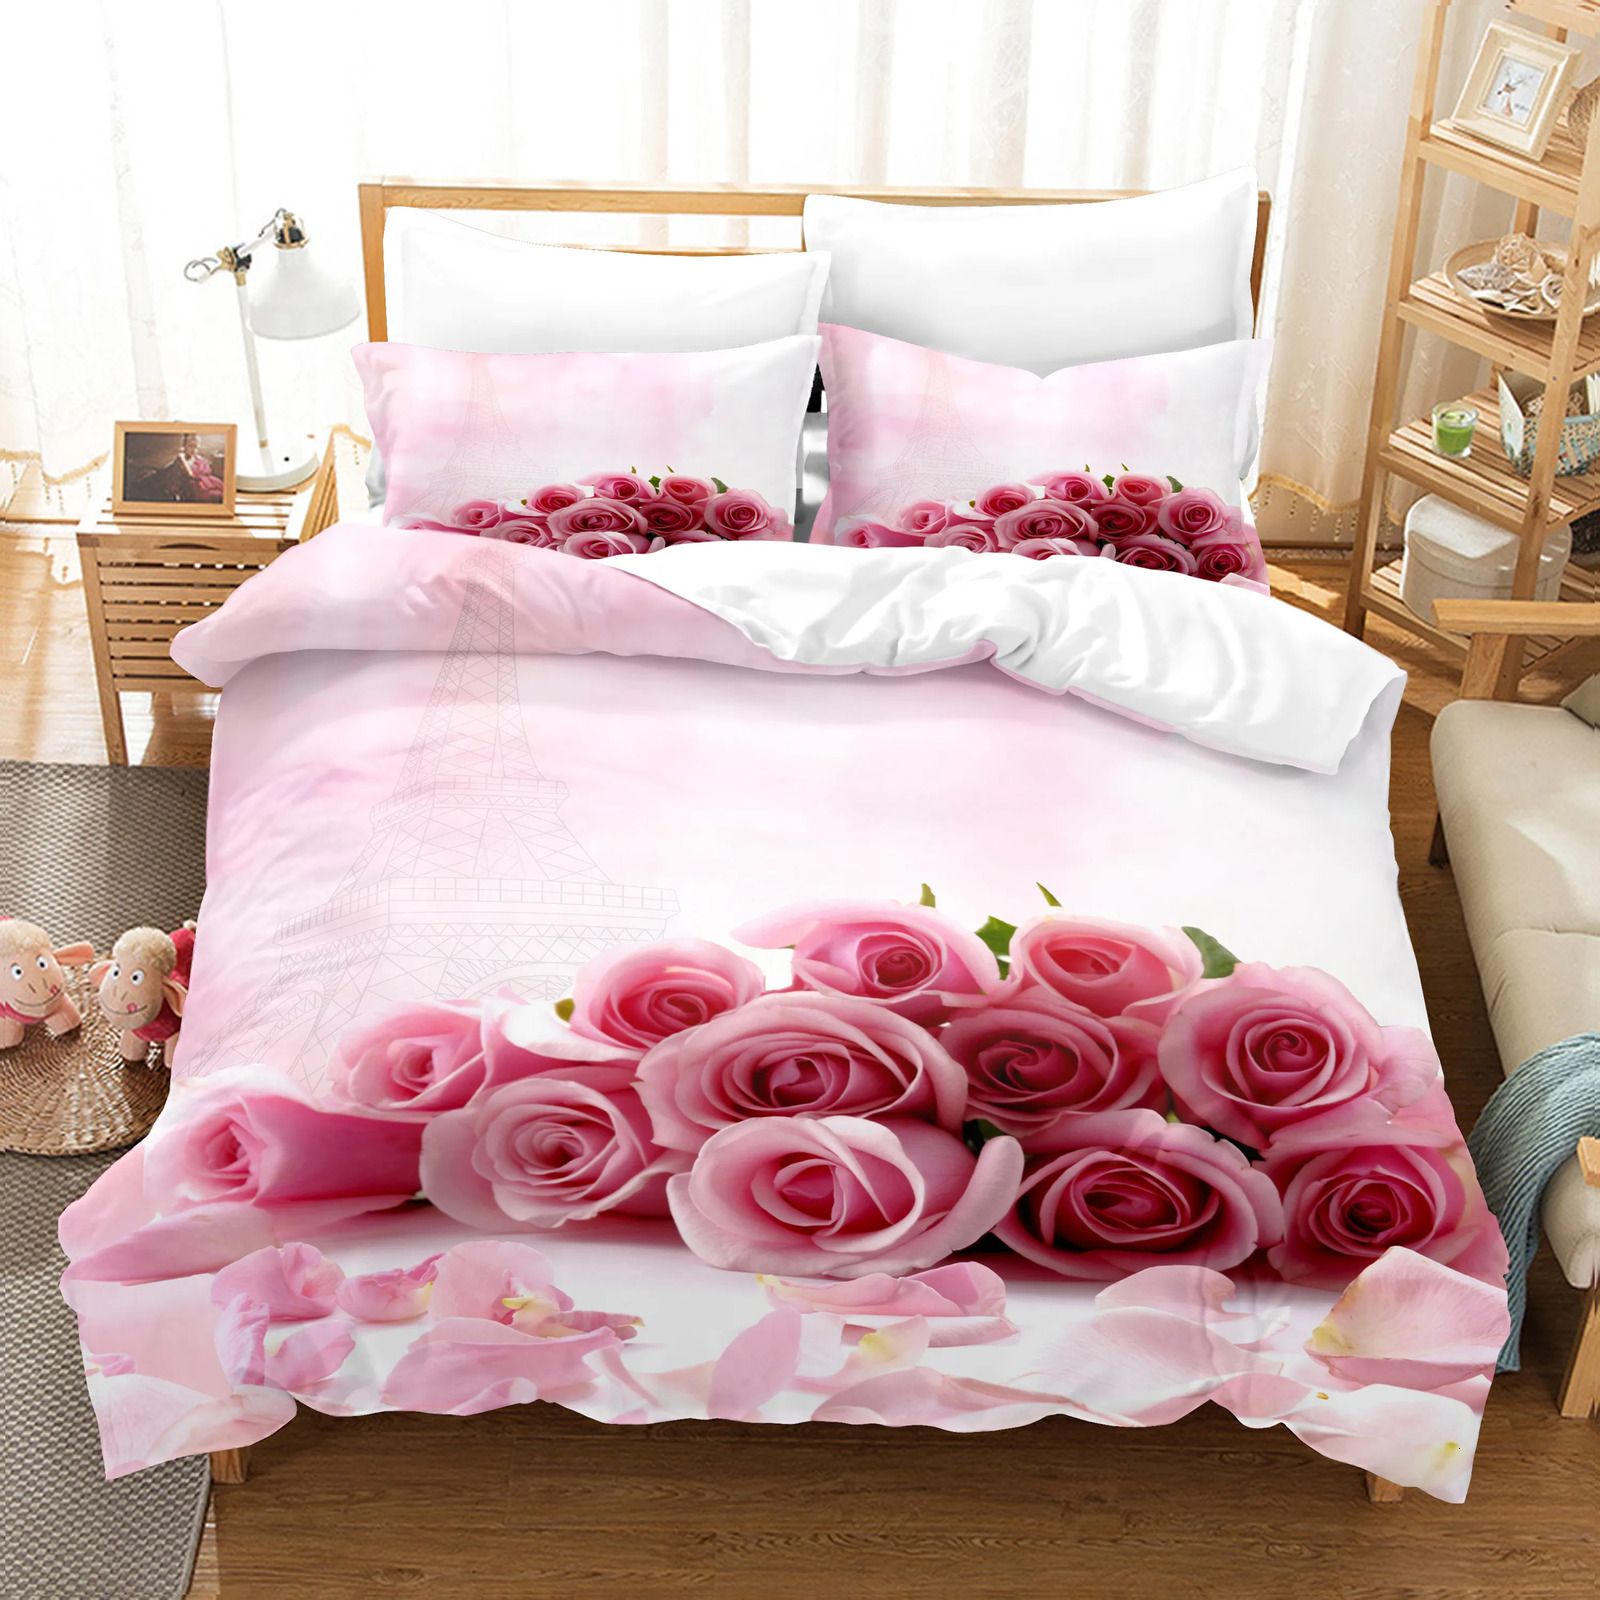 rose quilt cover 7